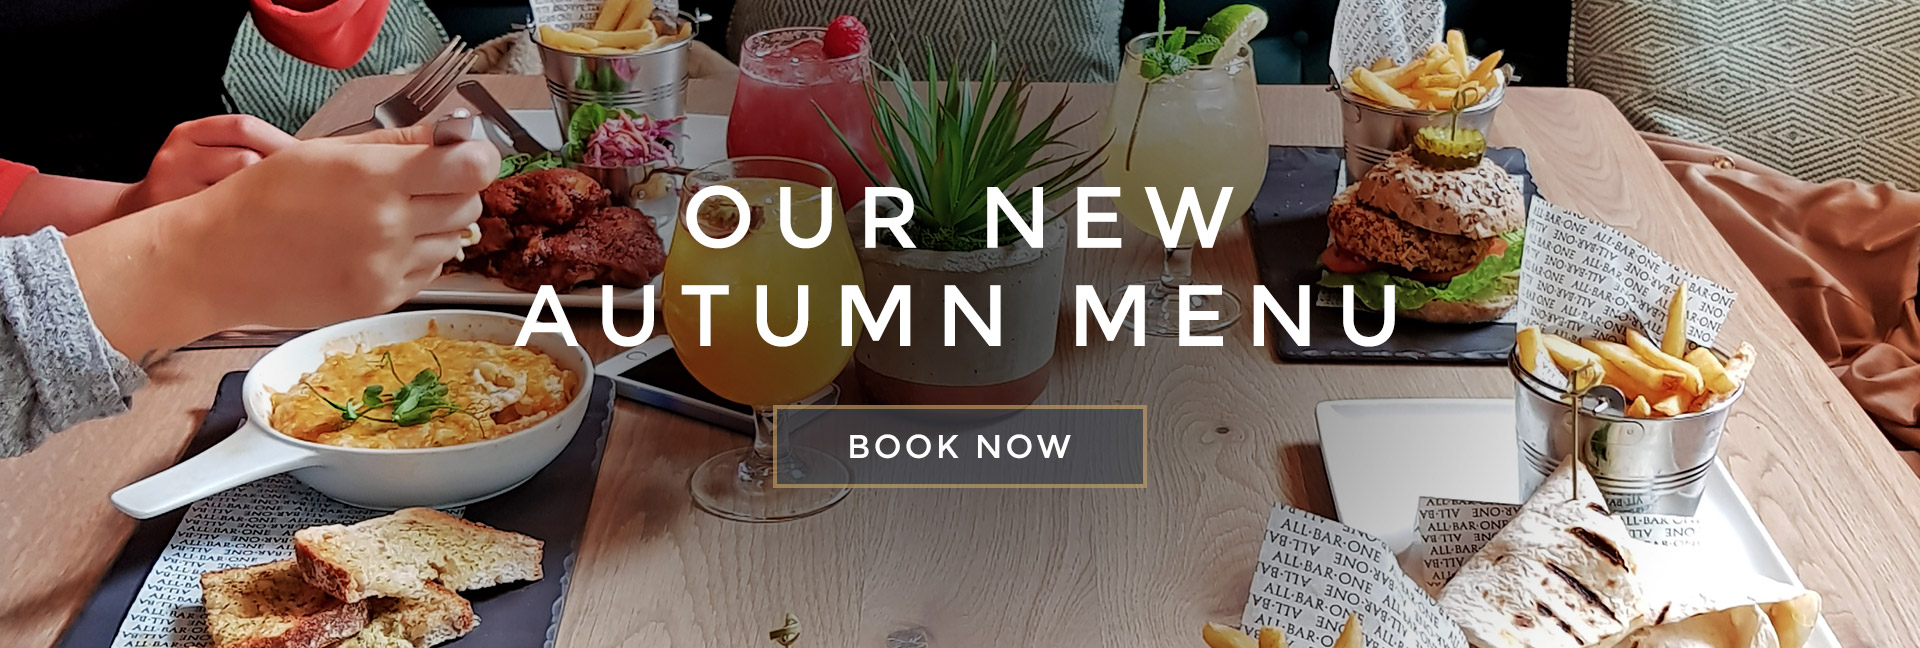 Our new Autumn menu at All Bar One New Oxford Street - Book now